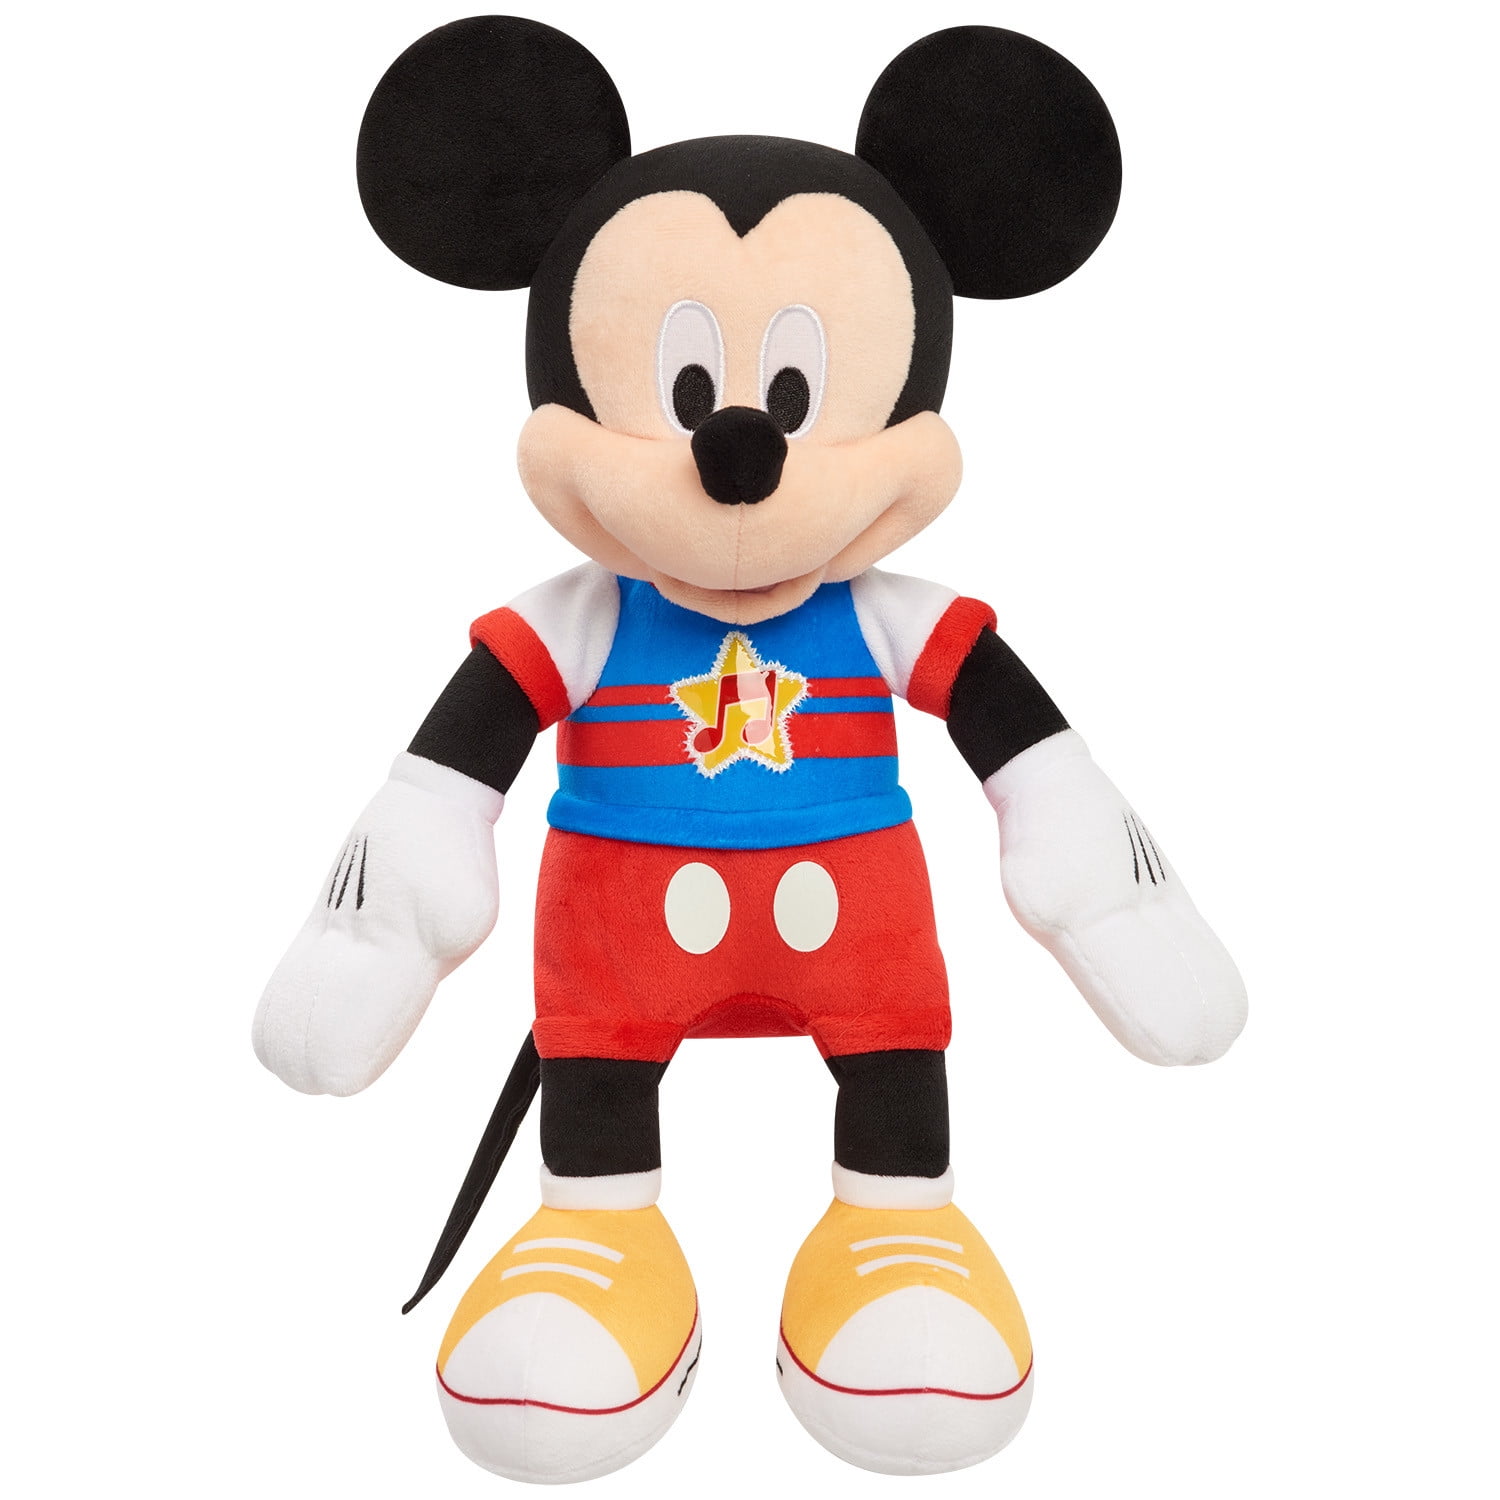 Disney Junior Mickey Mouse Funhouse Singing Fun Mickey Mouse 13 inch Lights and Sounds Feature Plush, Sings The Wiggle Giggle Song, Kids Toys for Ages 3 up